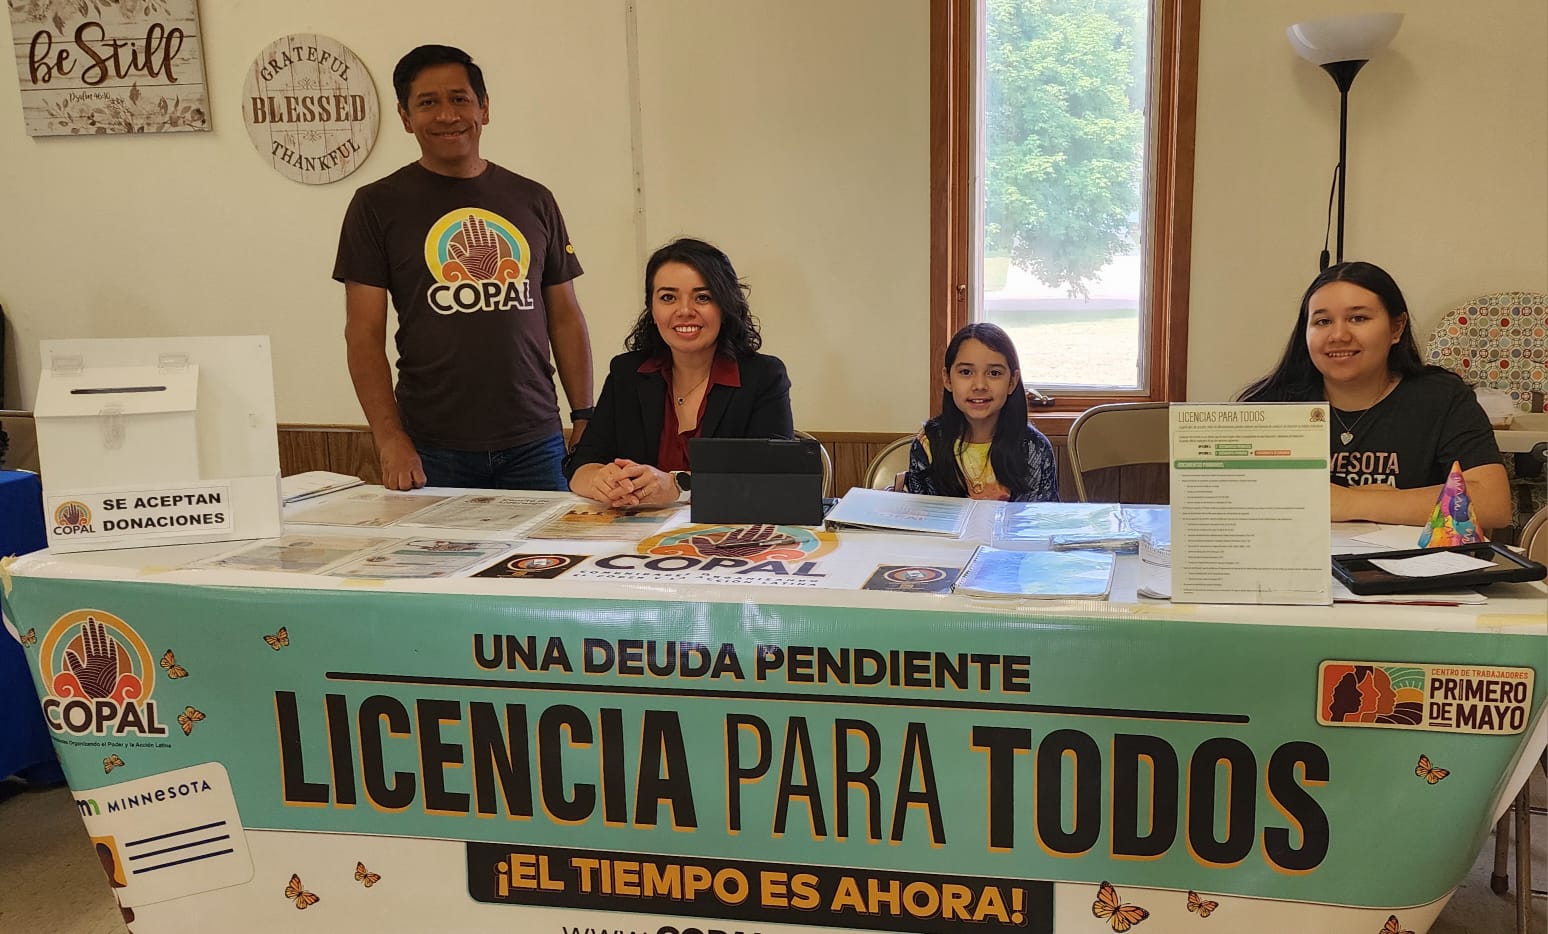 A Hispanic family sits and smiles at an information table set up in a community center